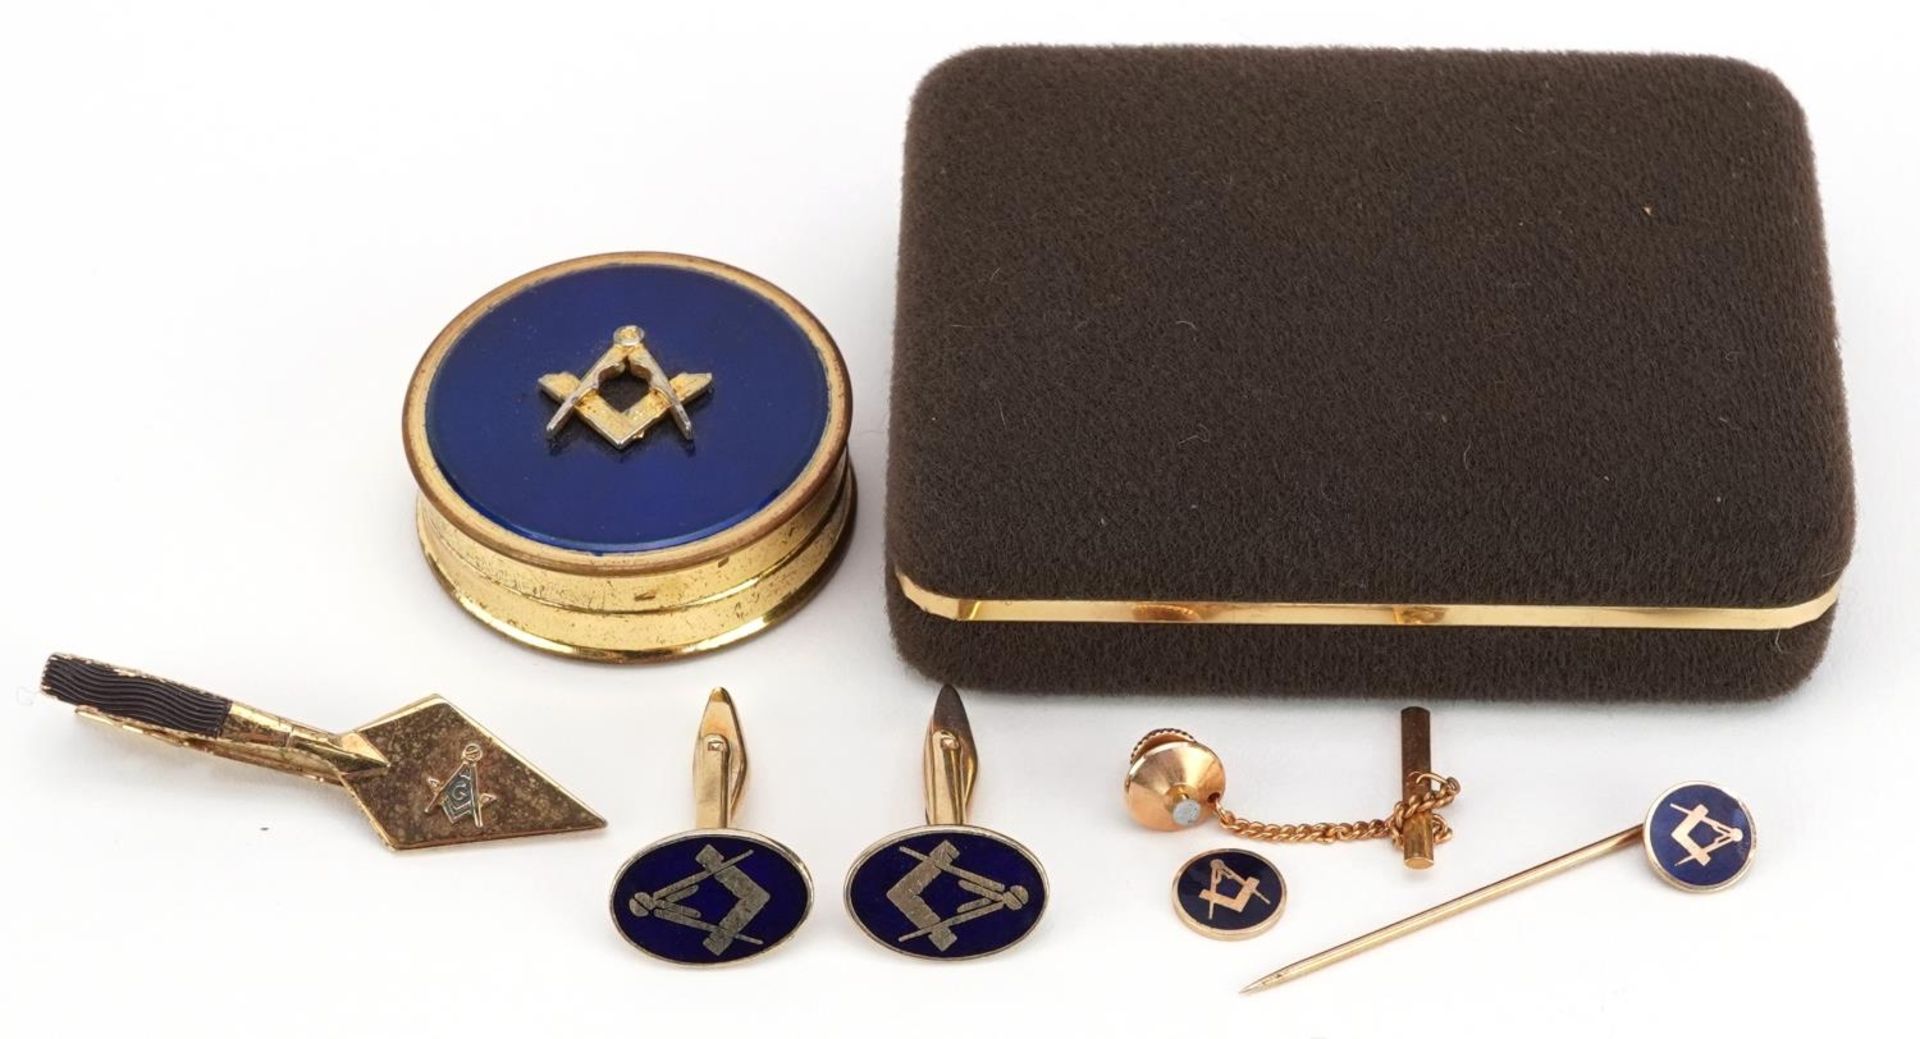 Masonic vanity and sundry items including compact, pair of cufflinks and tie clip, the largest 5cm